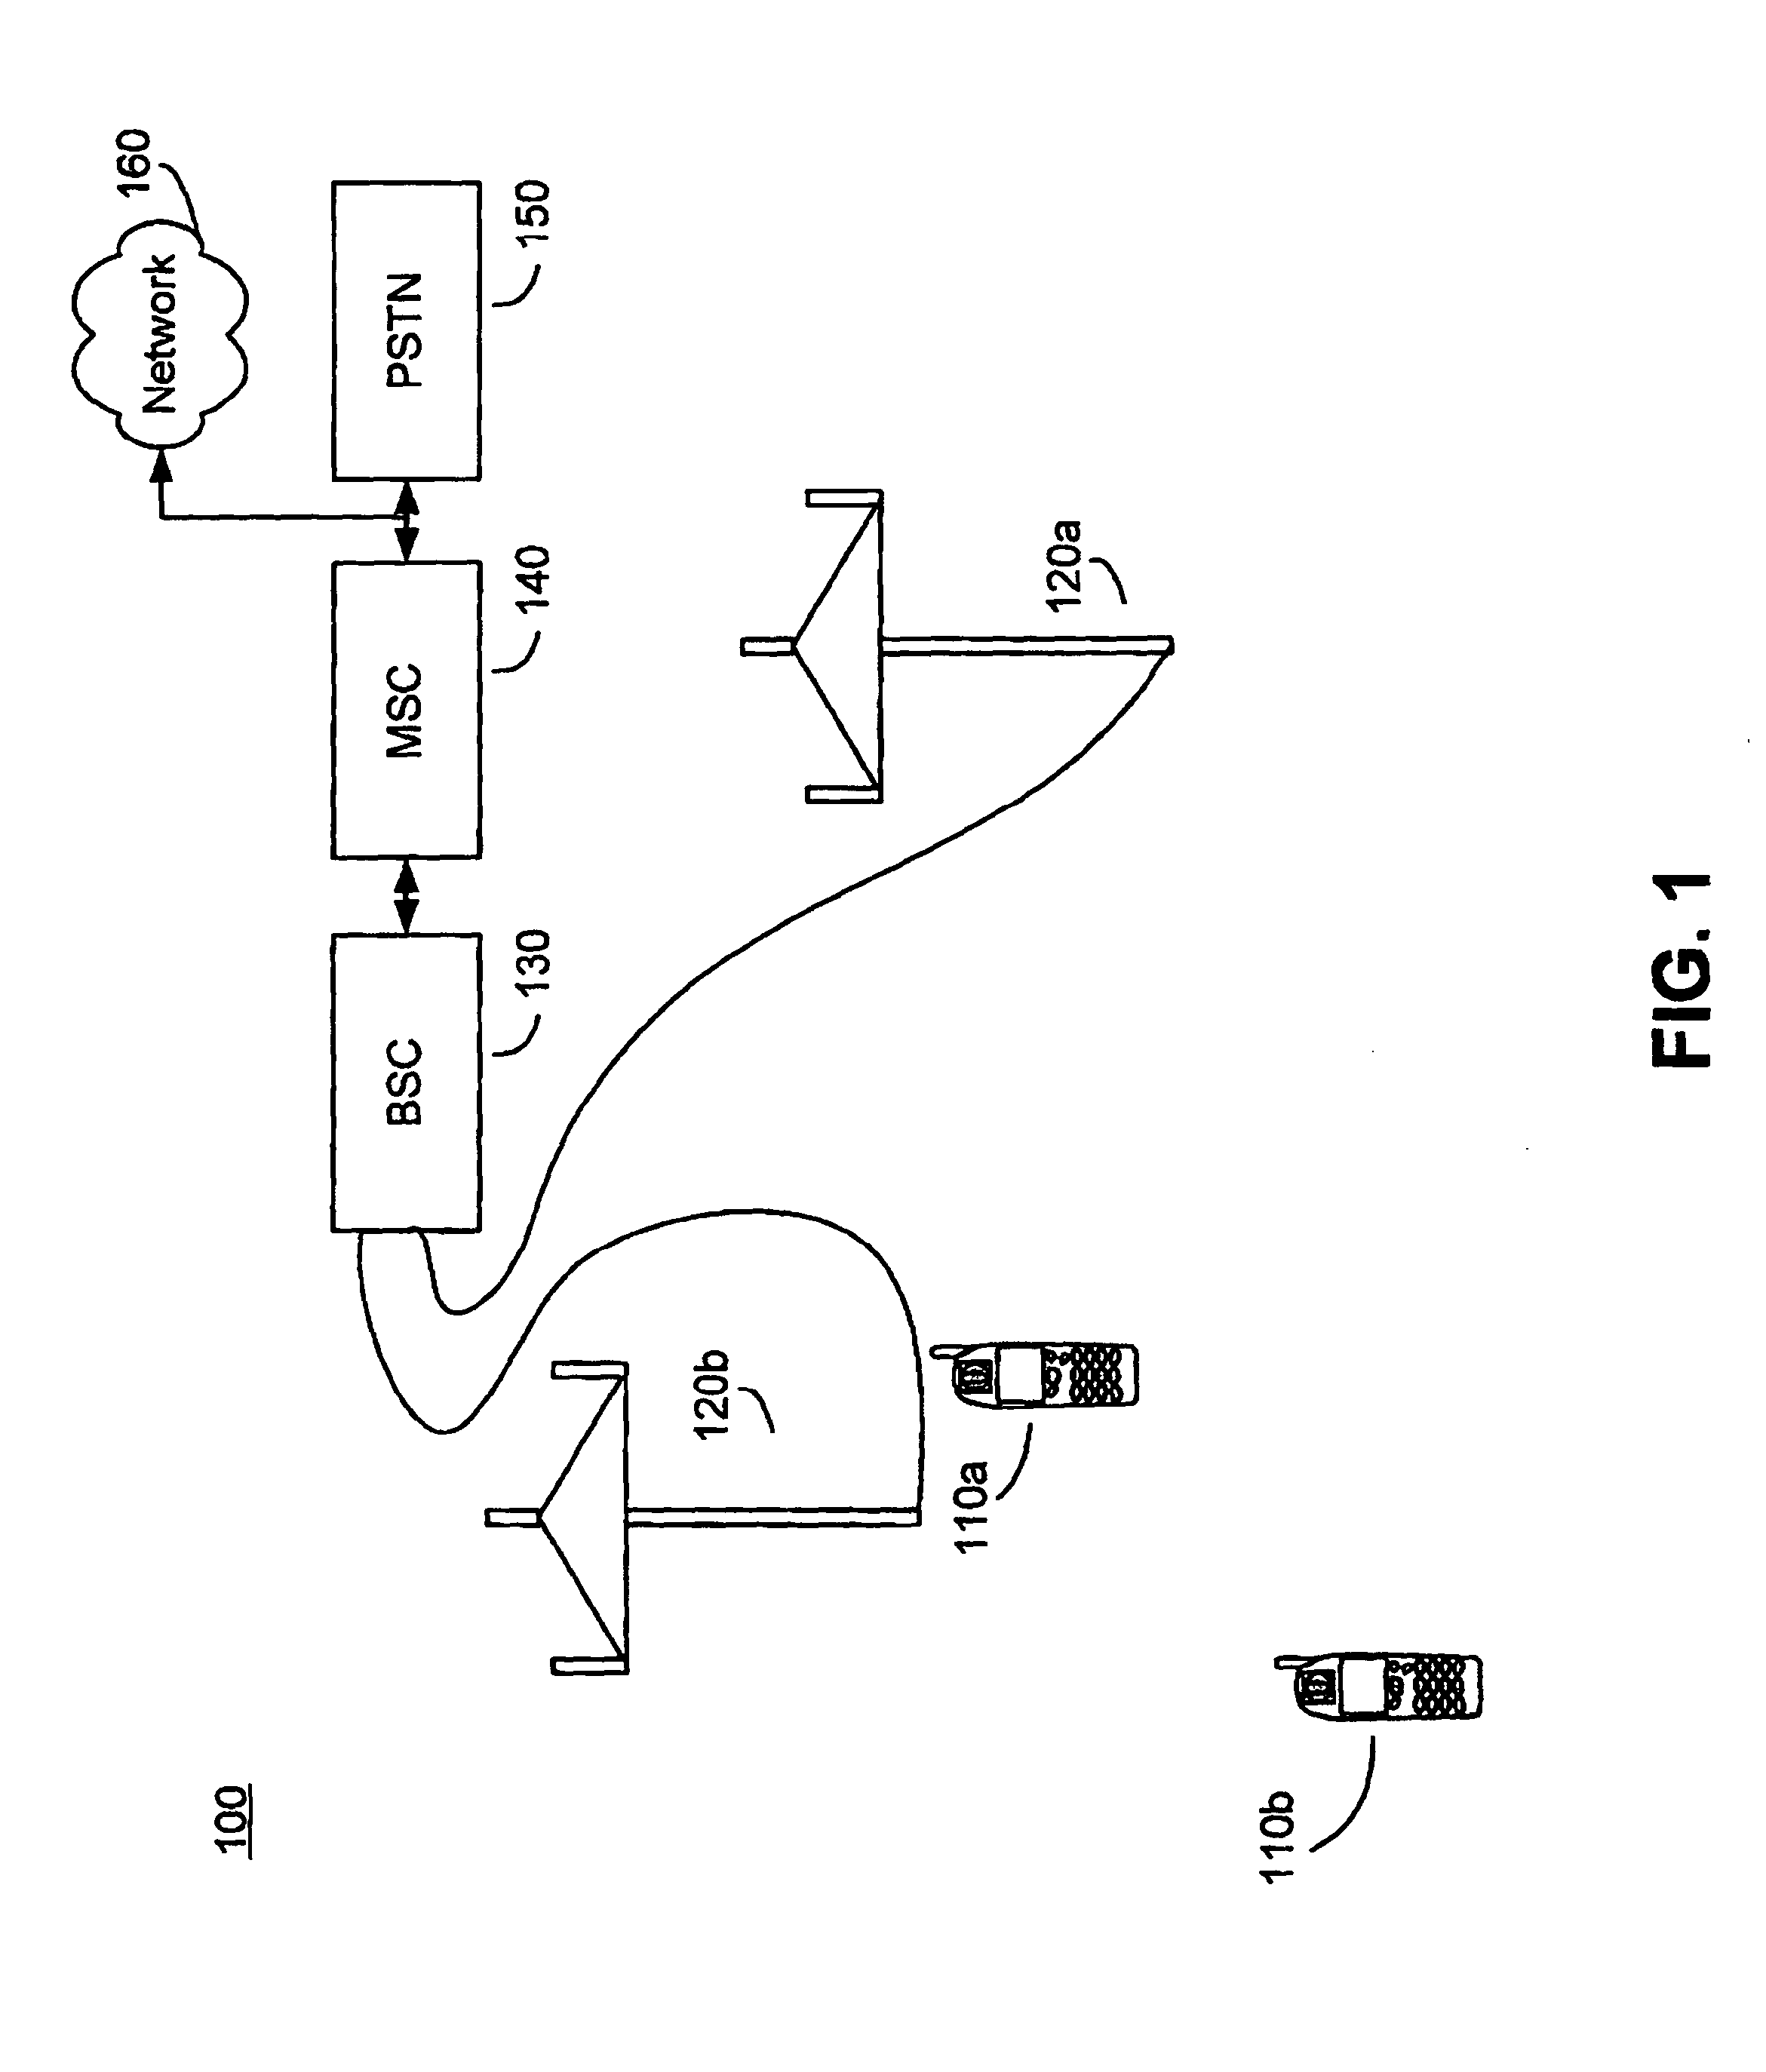 Resource allocation for shared signaling channels